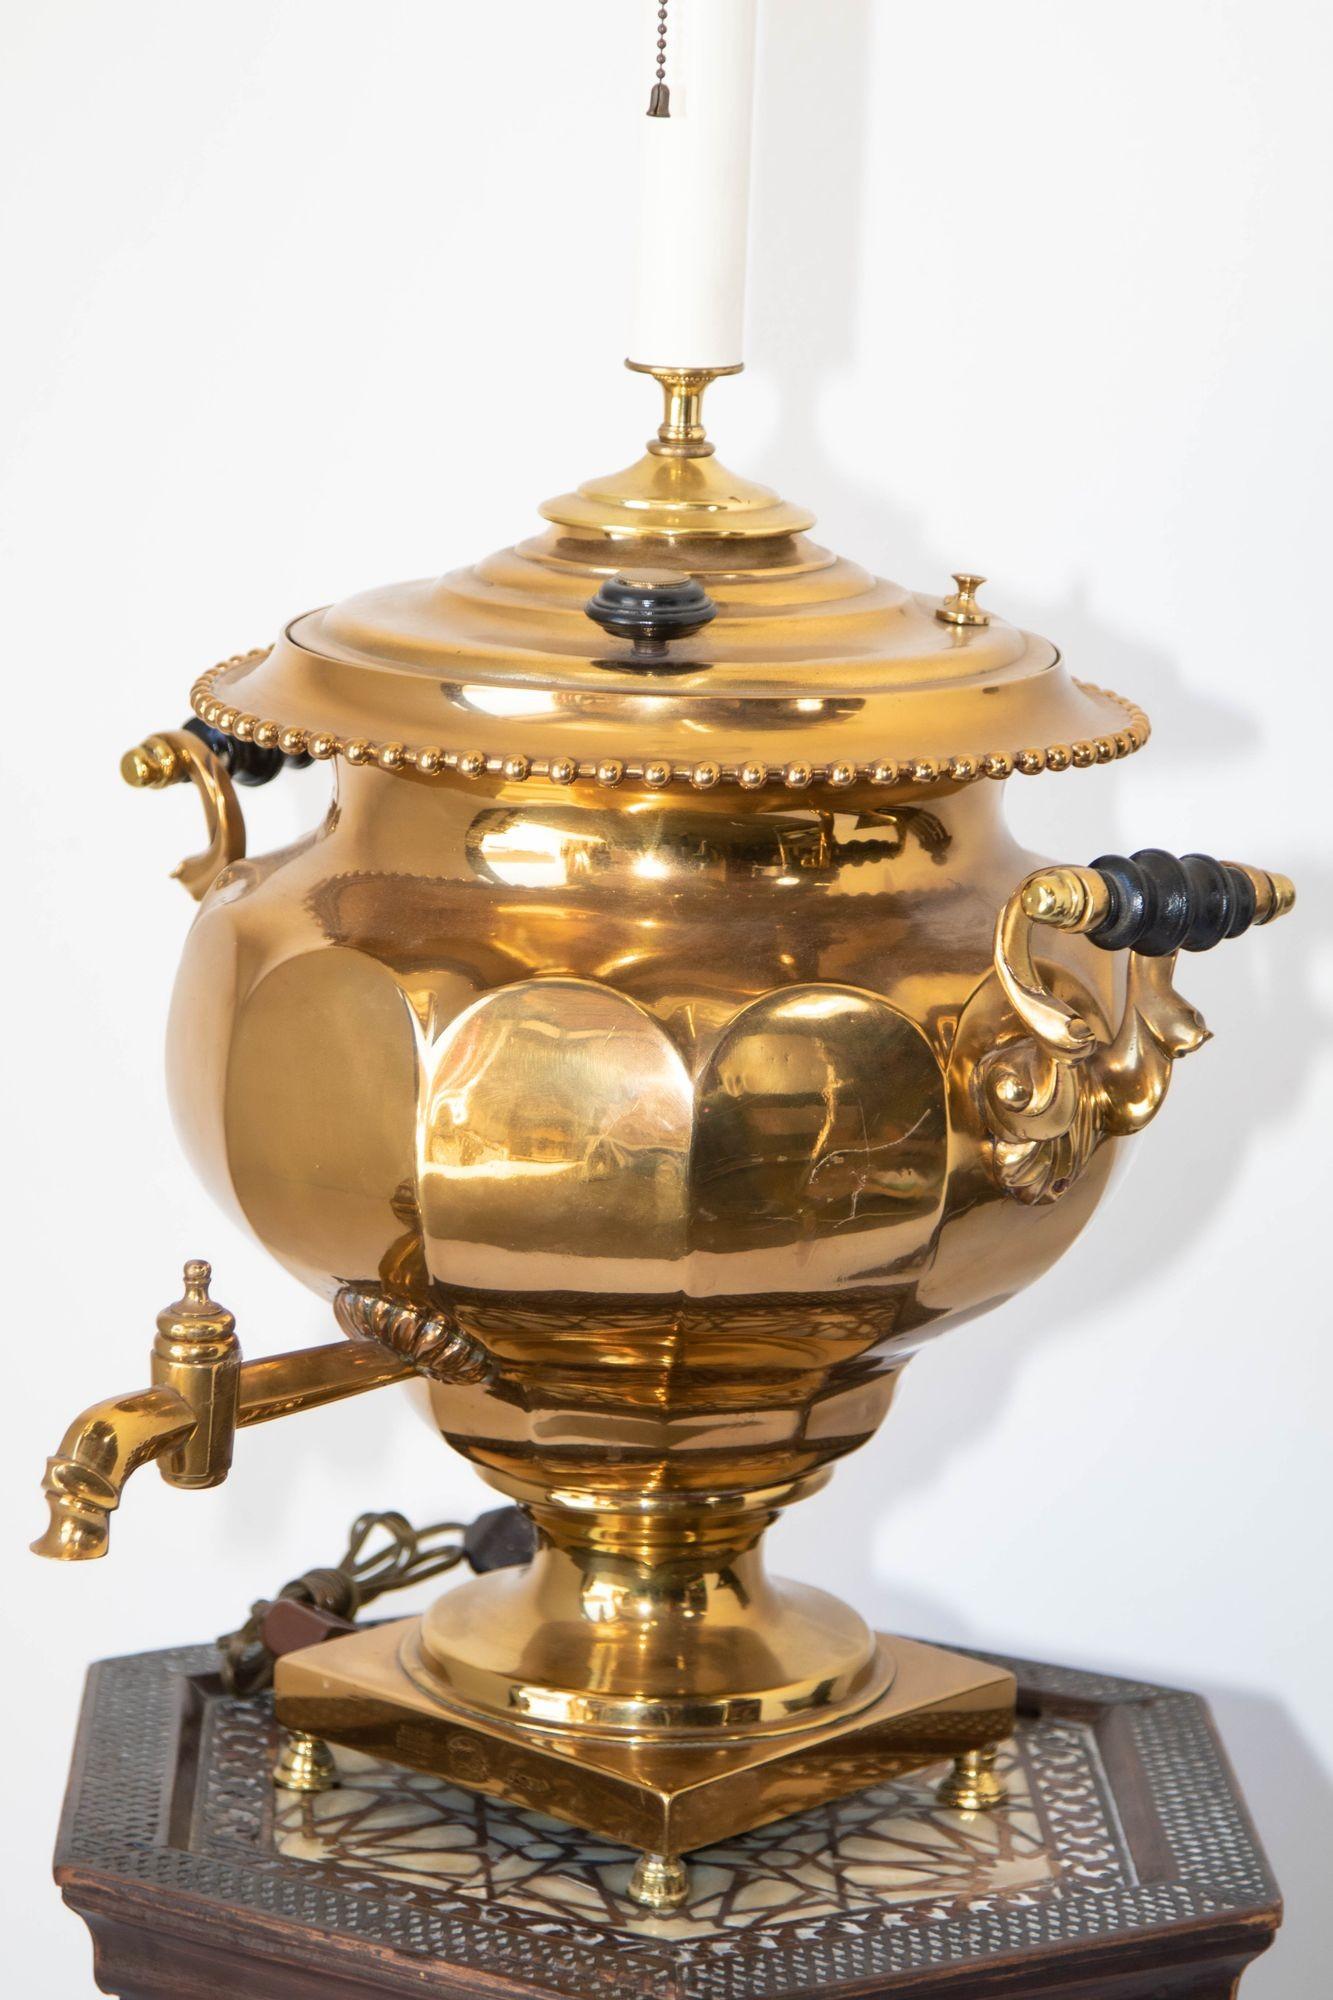 Large Russian polished brass samovar urn mounted as a lamp.
Exceptional quality and detail with oversized turned wooden handles on each side and a tall double light head with a brass finial. 
Brass Russian Samovar. Vasily Stephanovich Batashev -